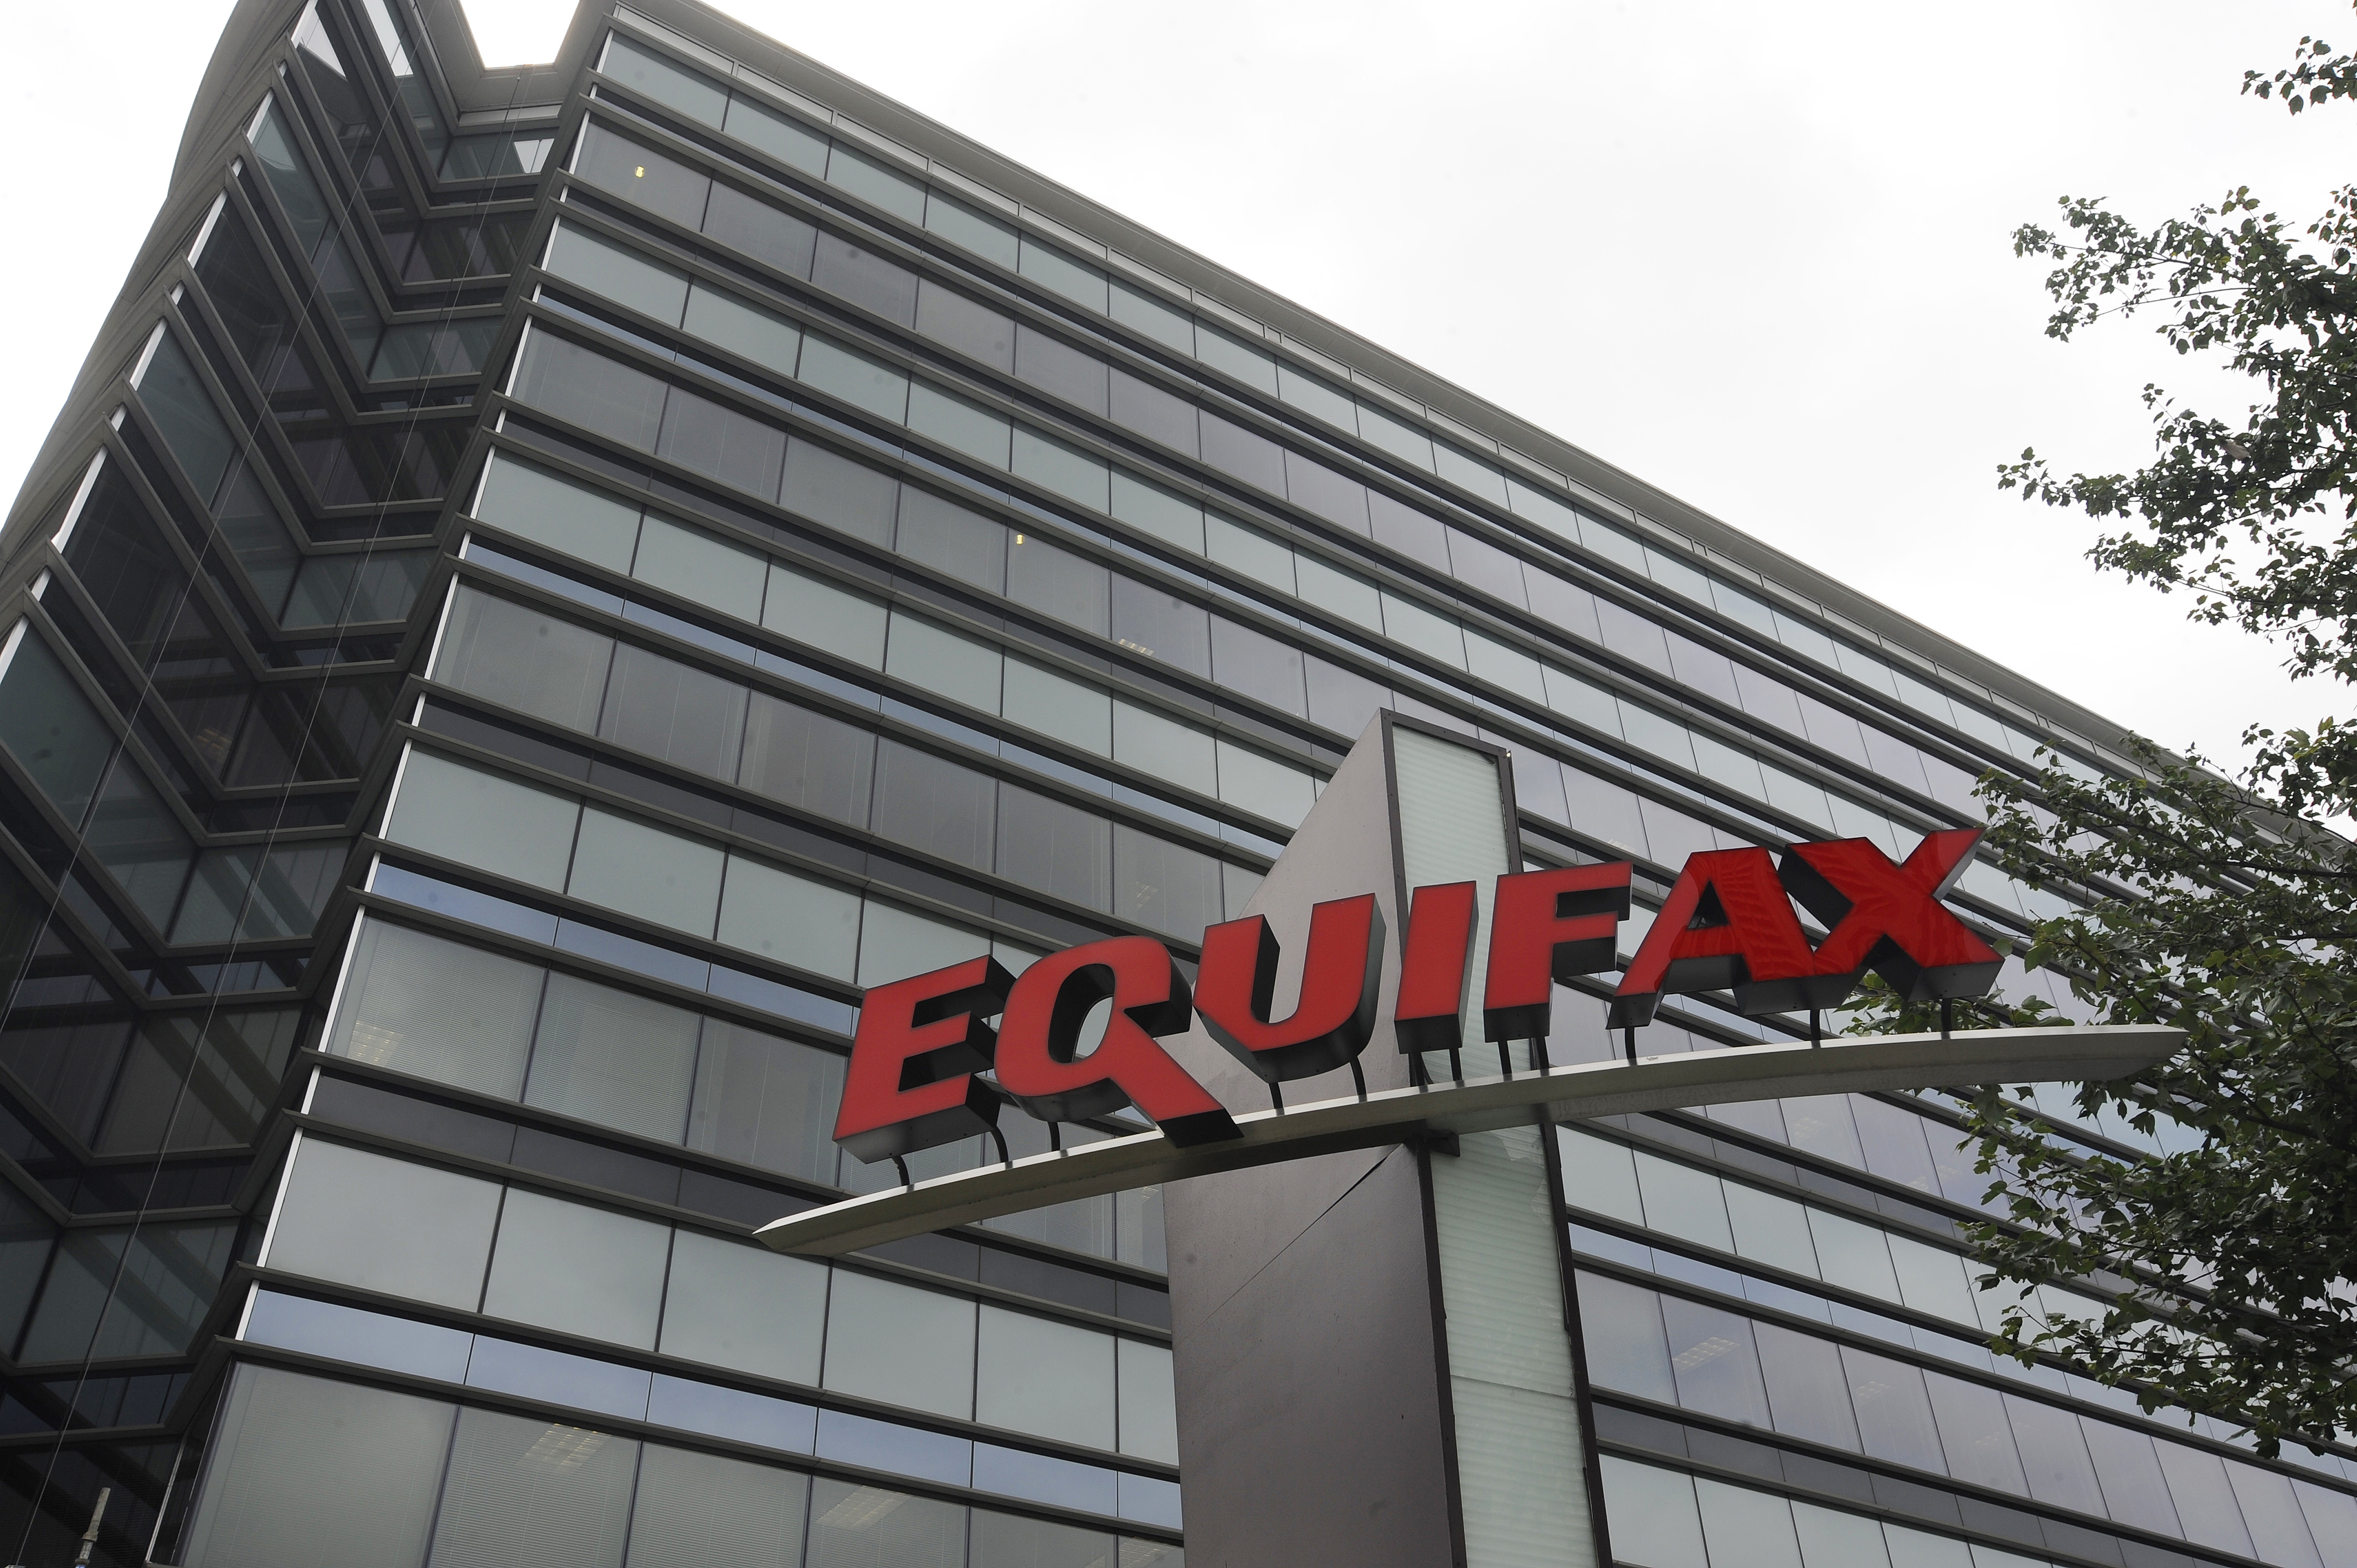 Consumers Who Go to Equifax for Help After Data Breach May Lose Their Right to Sue